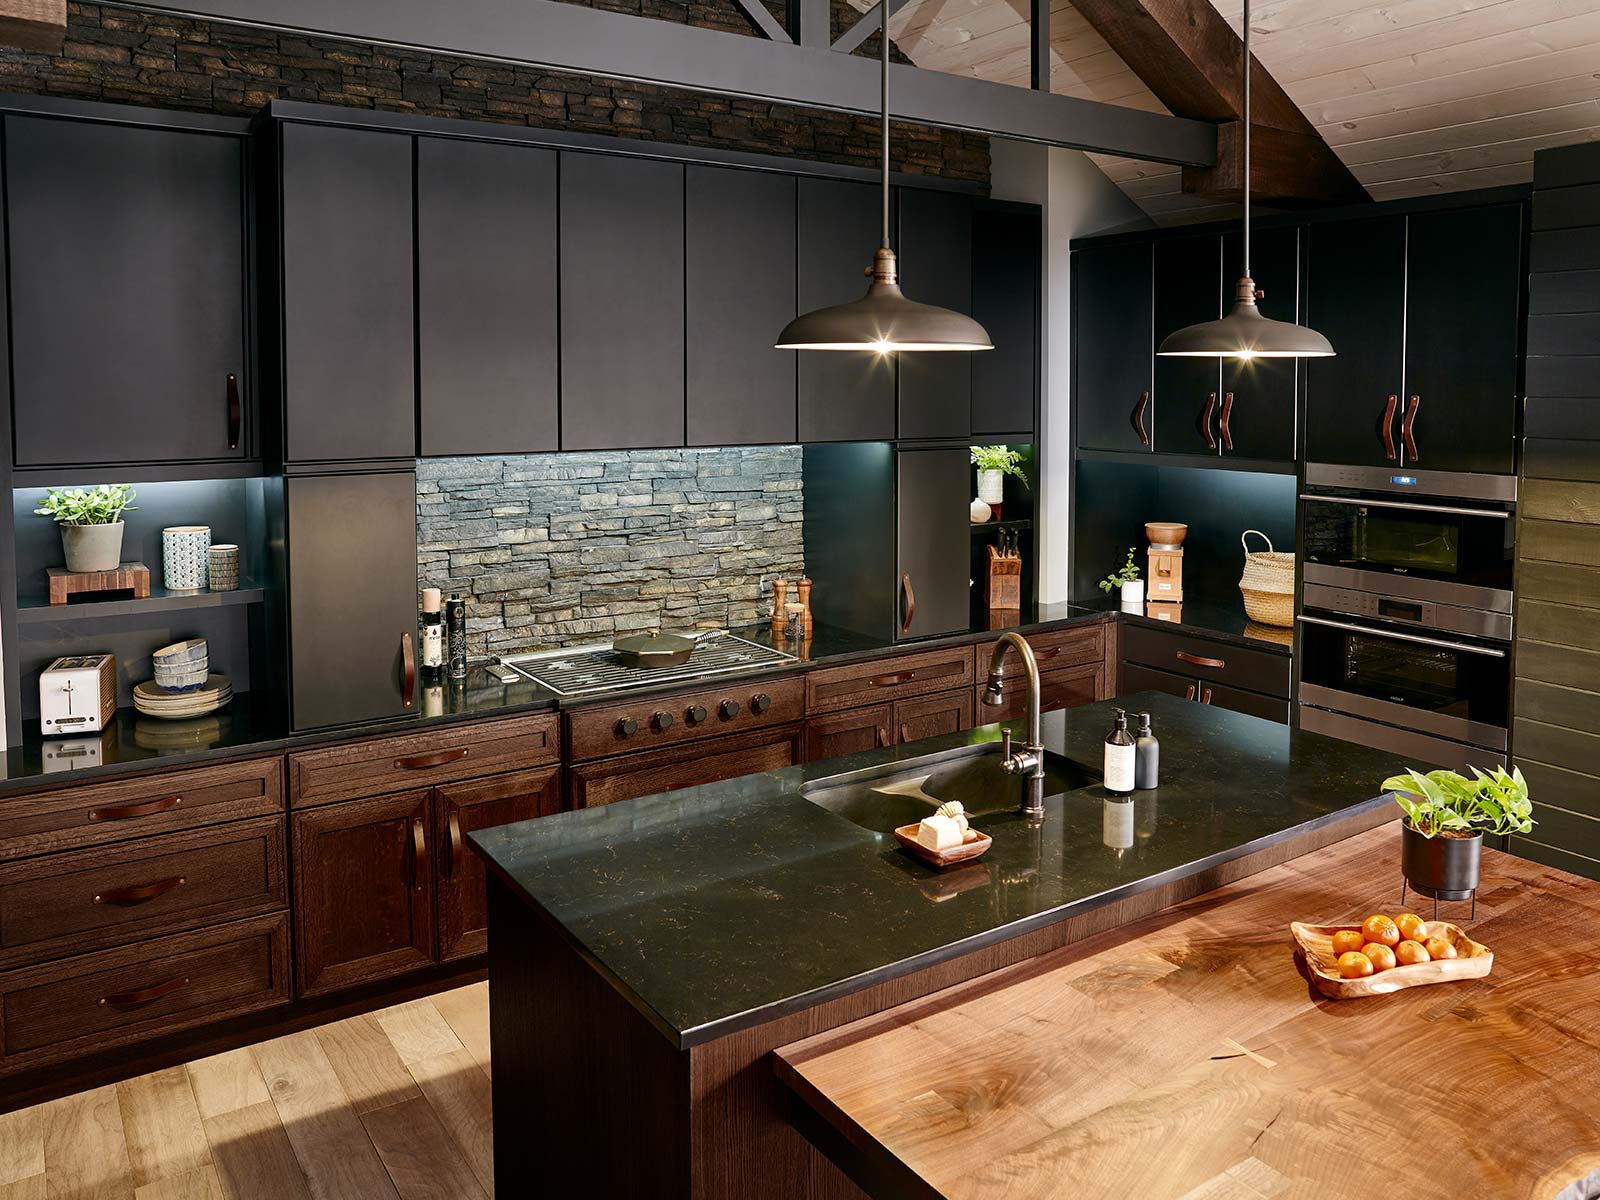 Black cabinets in a moody kitchen design